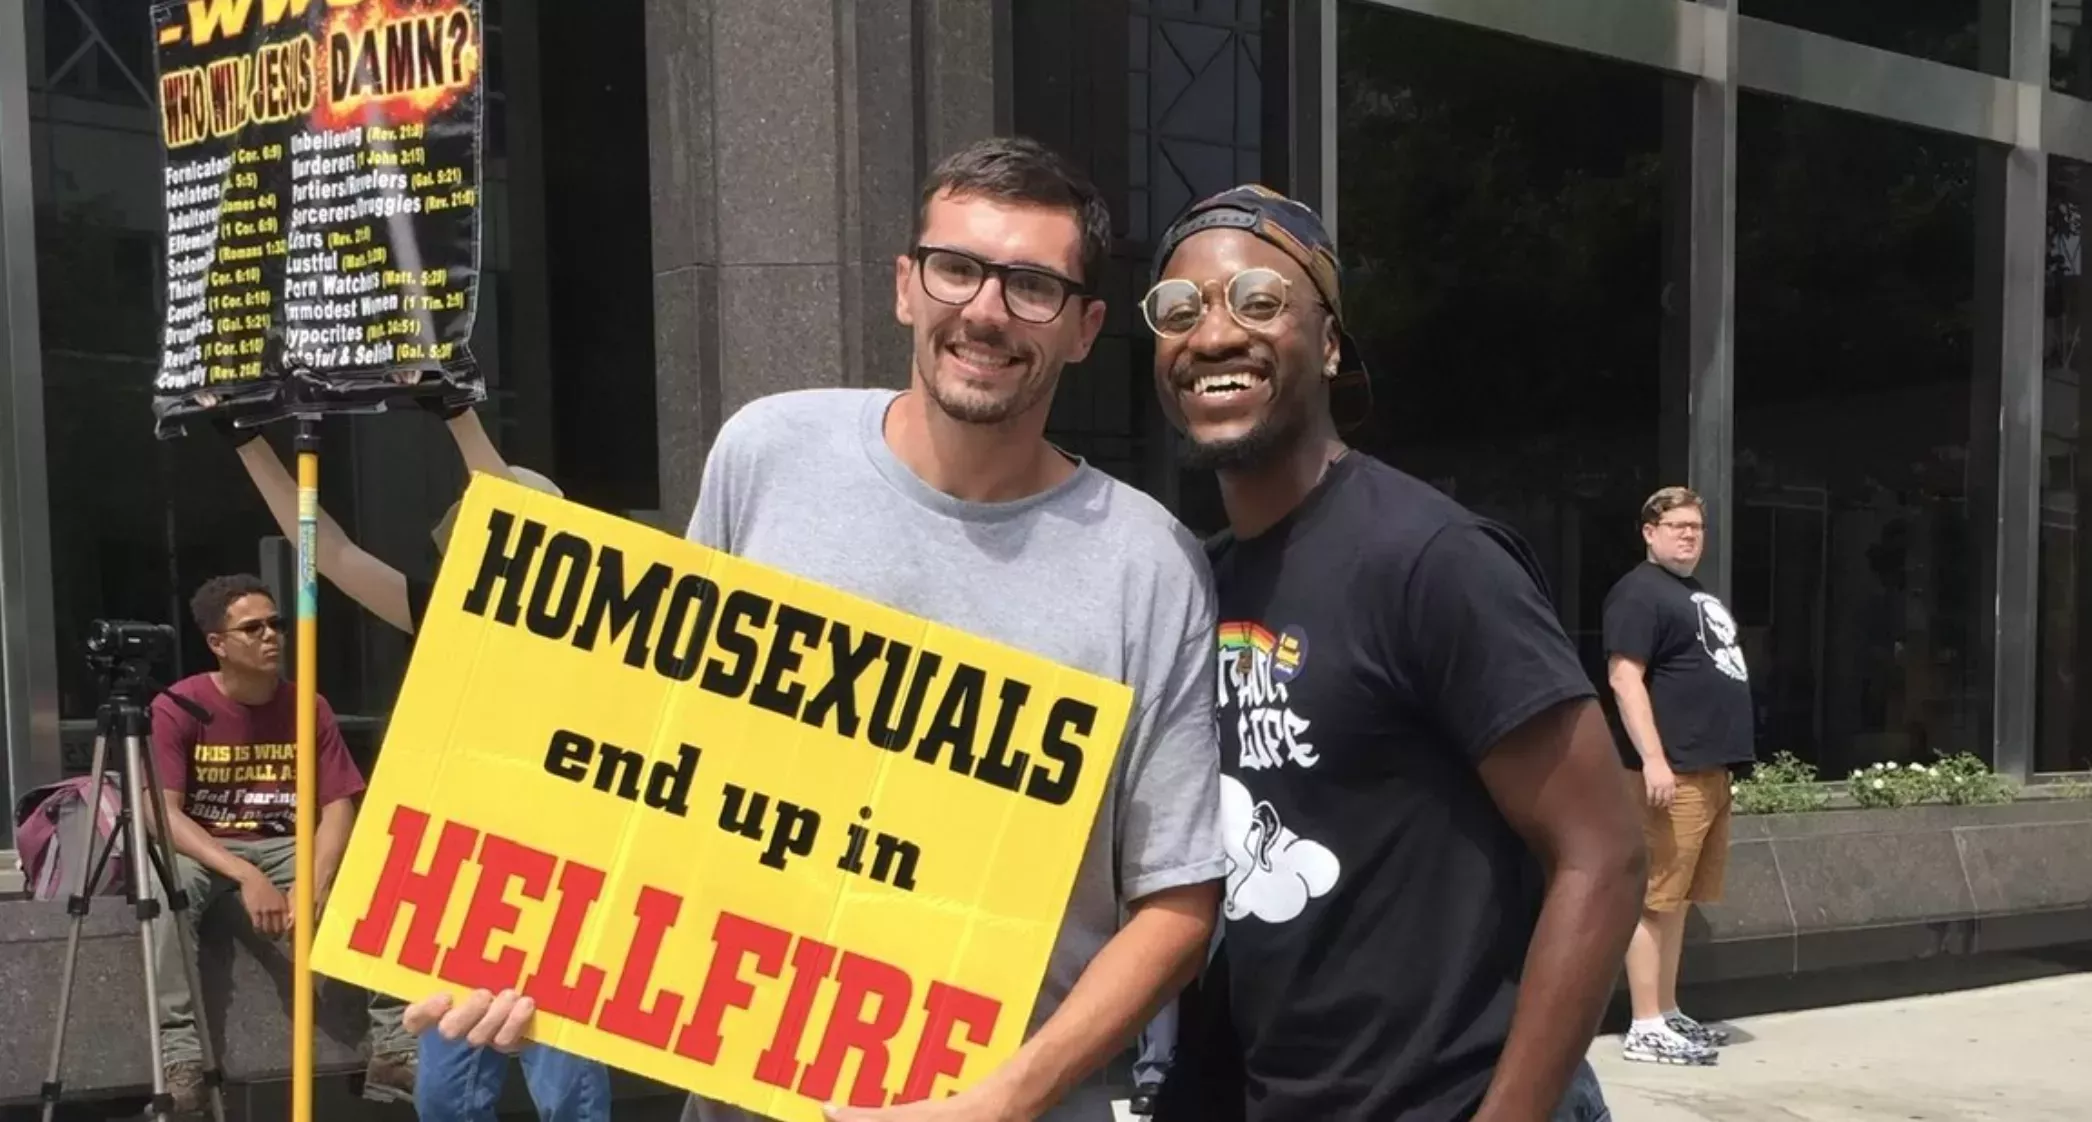 A white man in a gray shirt and glasses holds up a yellow sign that reads "Homosexuals end up in hellfire" while smiling next to a gay Black man in a backwards baseball hat, glasses, and a black shirt with a rainbow on it. They stand smiling outside in front of a windowed building while onlookers watch.